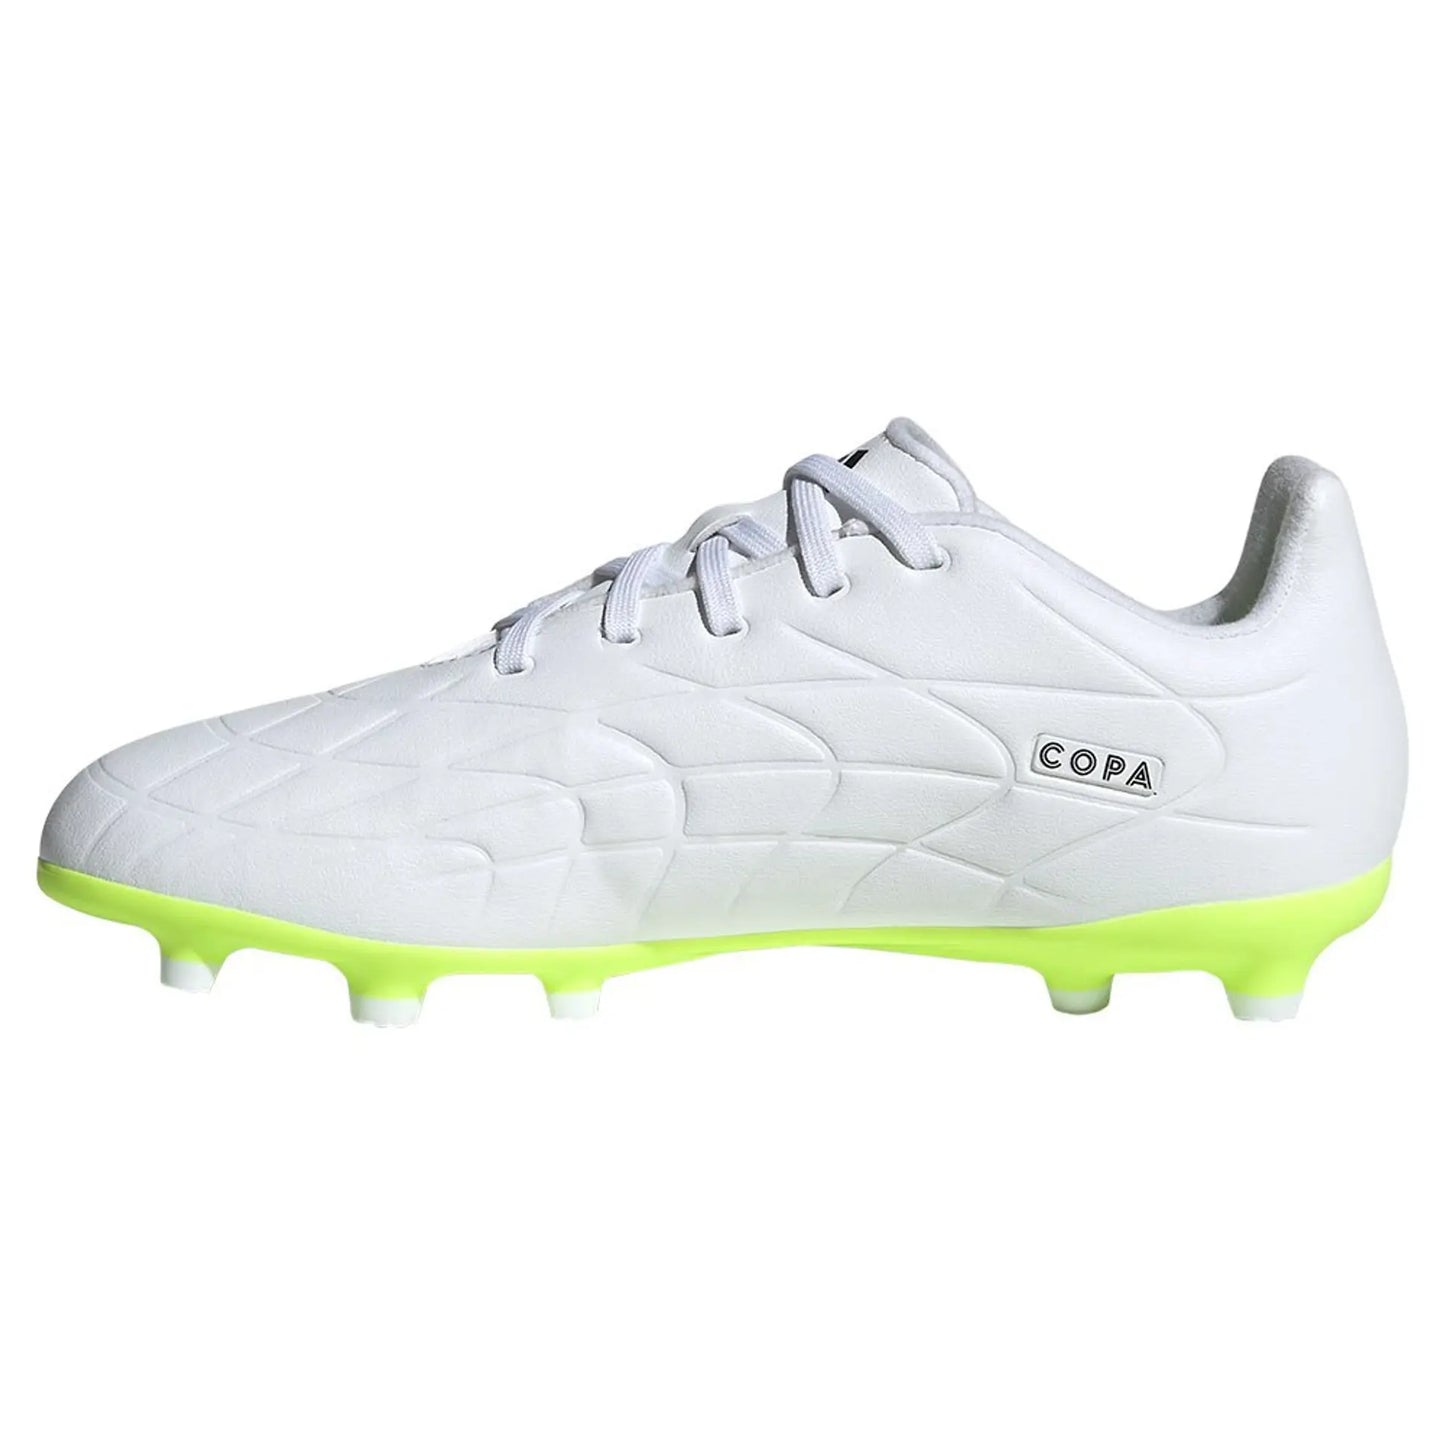 adidas Youth Copa.3 FG White Black Neon Yellow Soccer Cleats